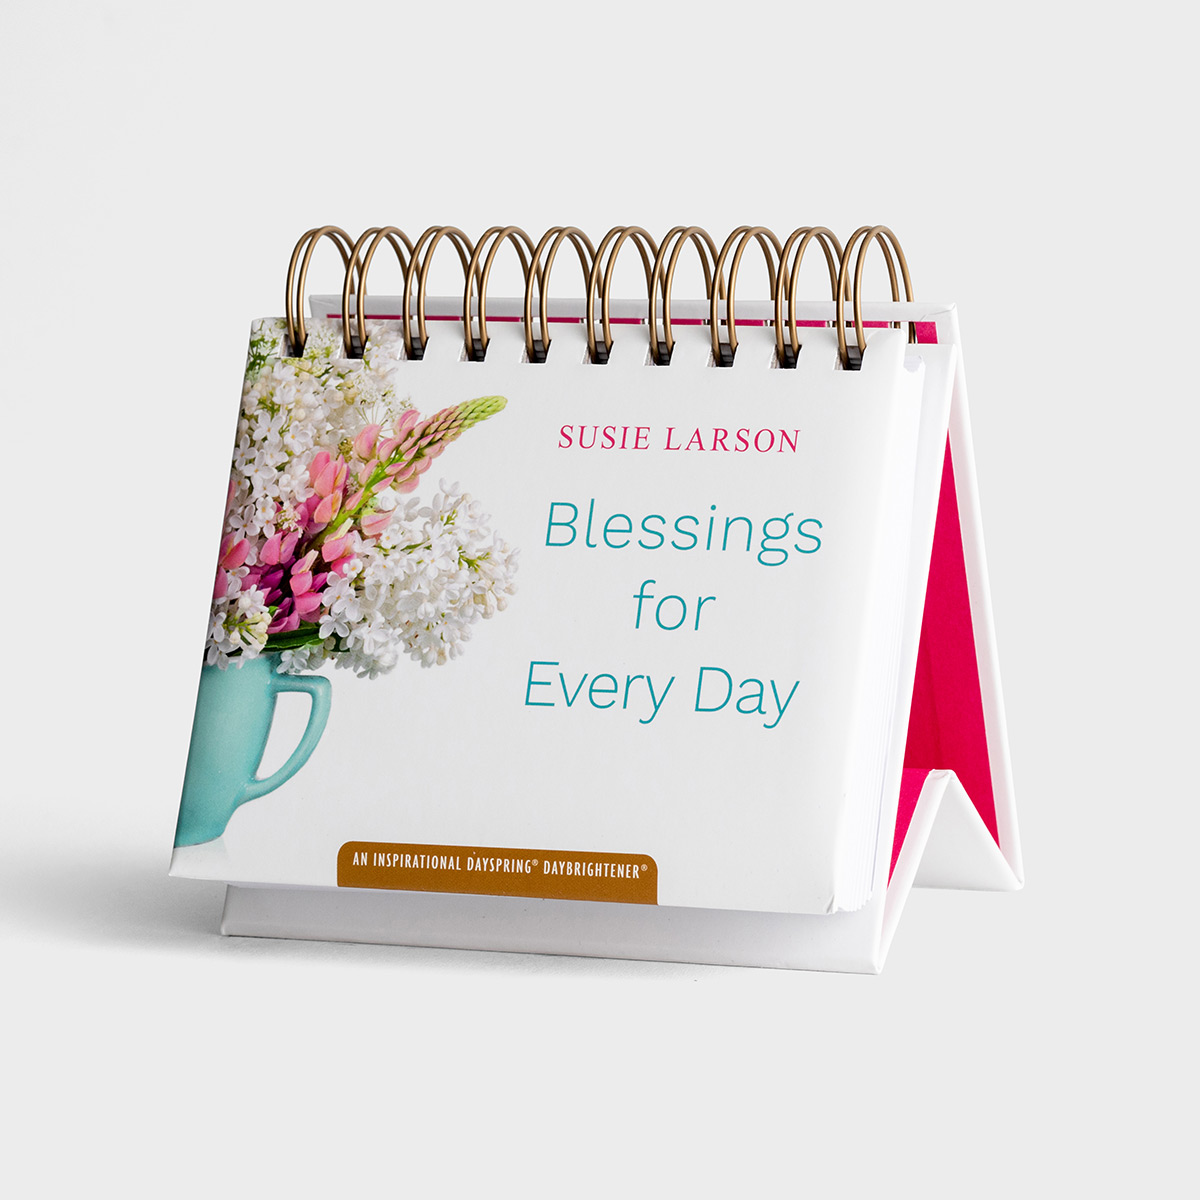 Susie Larson - Blessings for Every Day - Perpetual Calendar